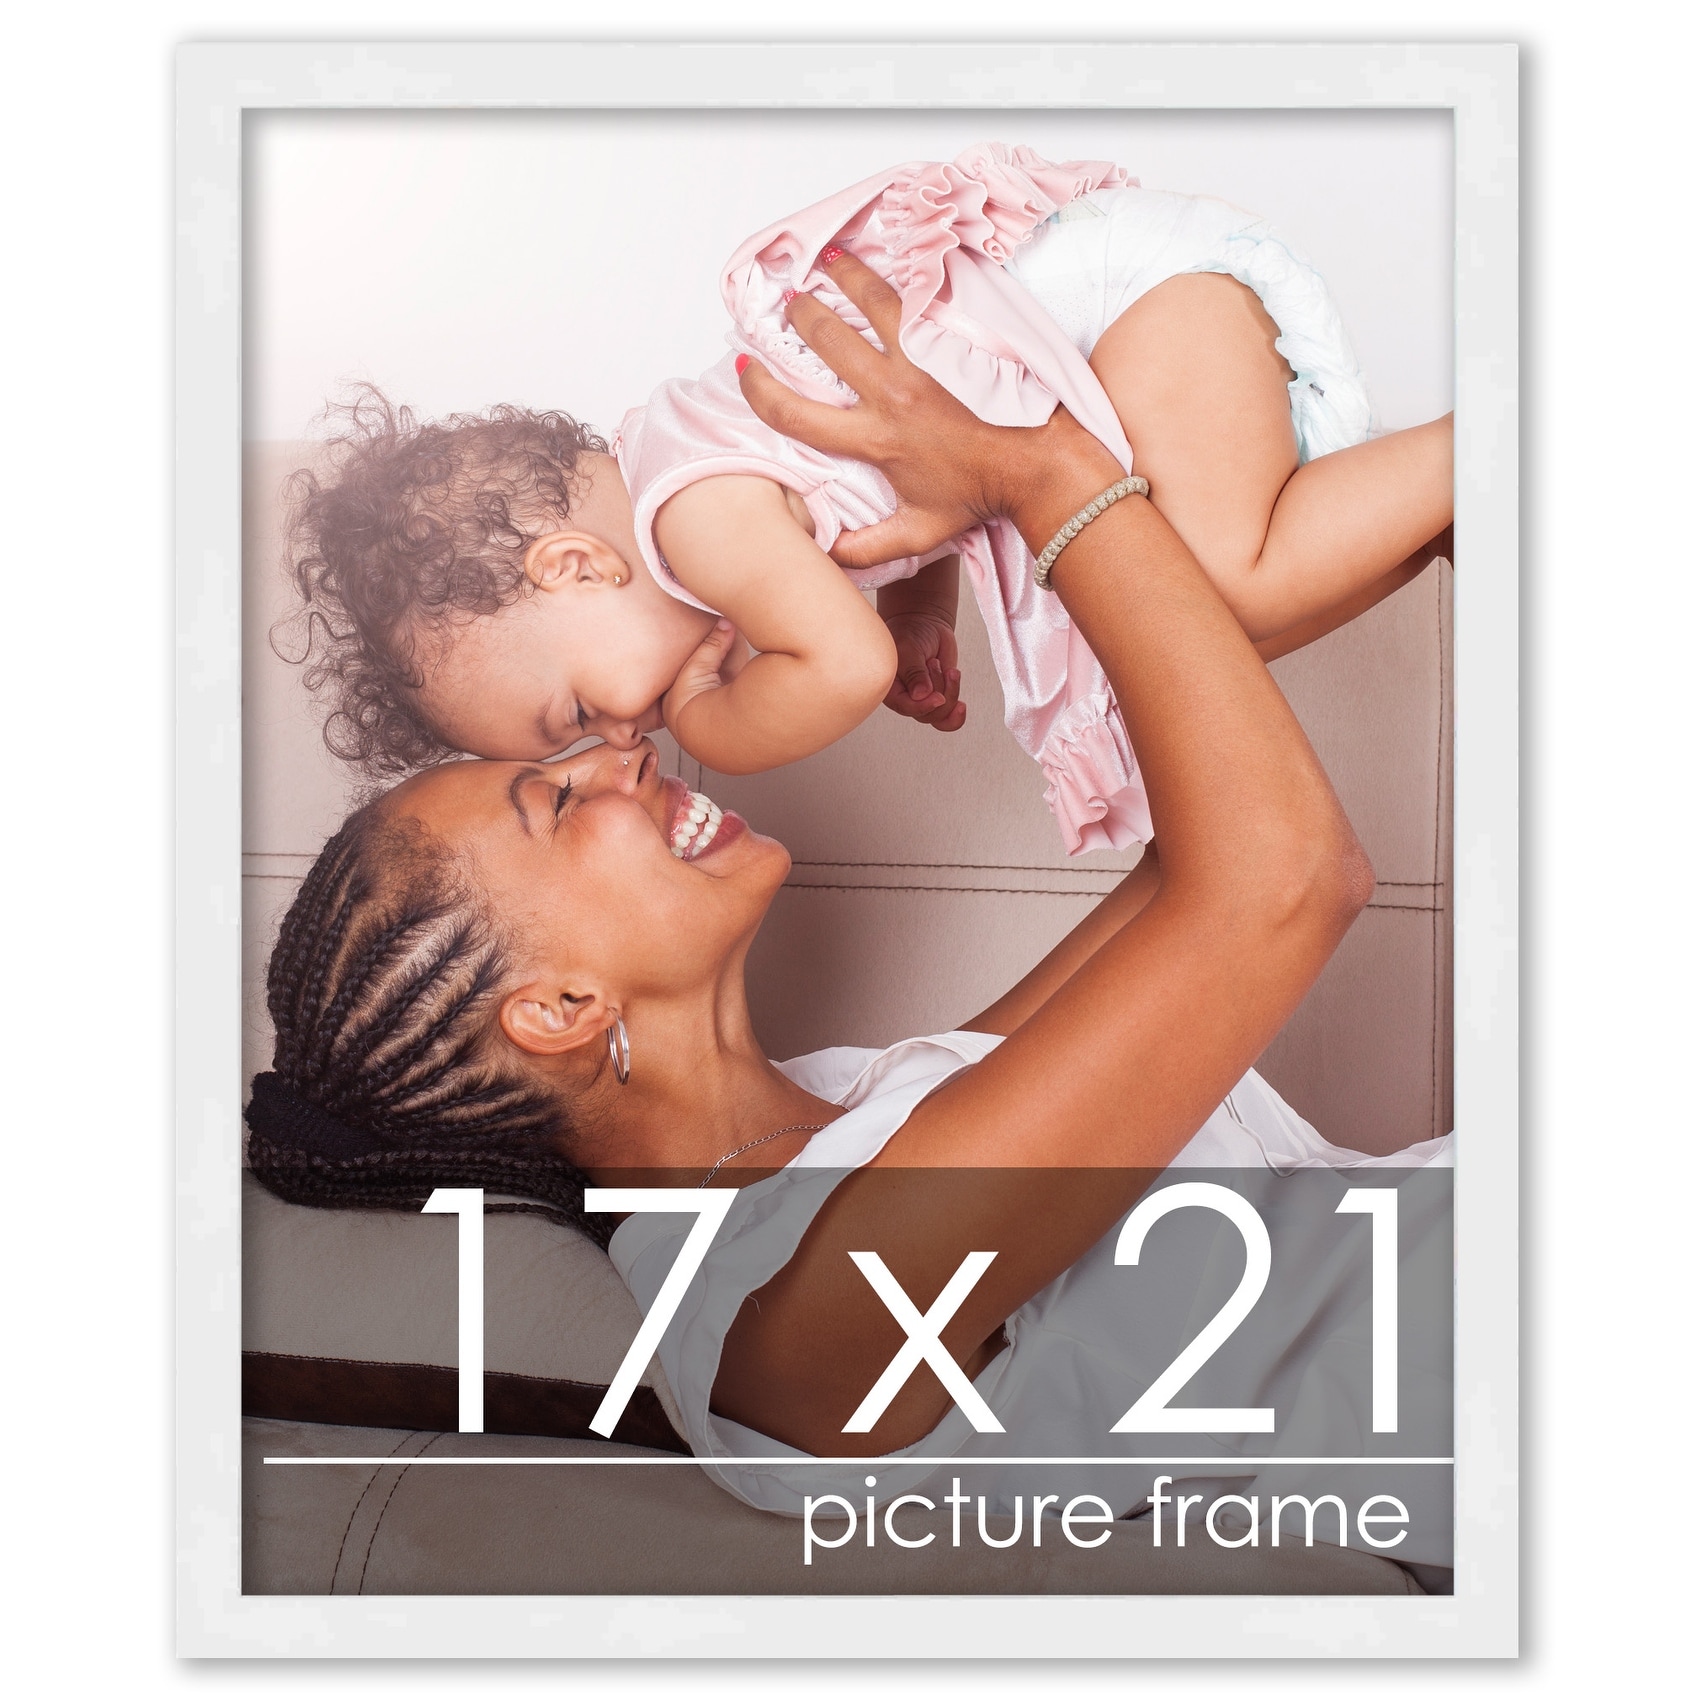 17x21 Contemporary Black Complete Wood Picture Frame with UV Acrylic, Foam Board Backing, & Hardware